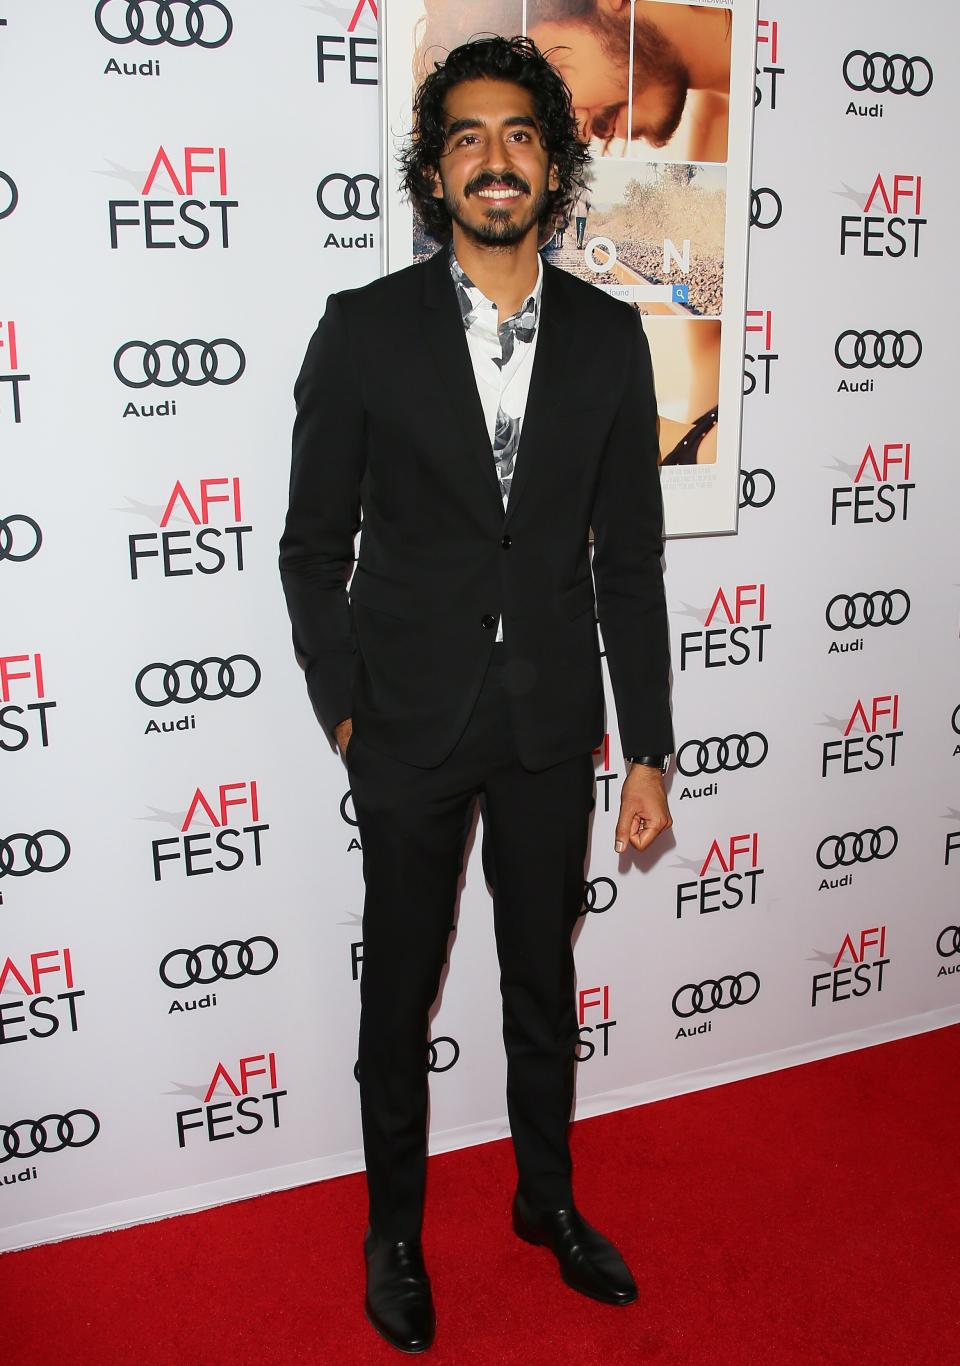 Patel at the premiere of "Lion" at AFI Fest in Hollywood on Nov. 11, 2016.